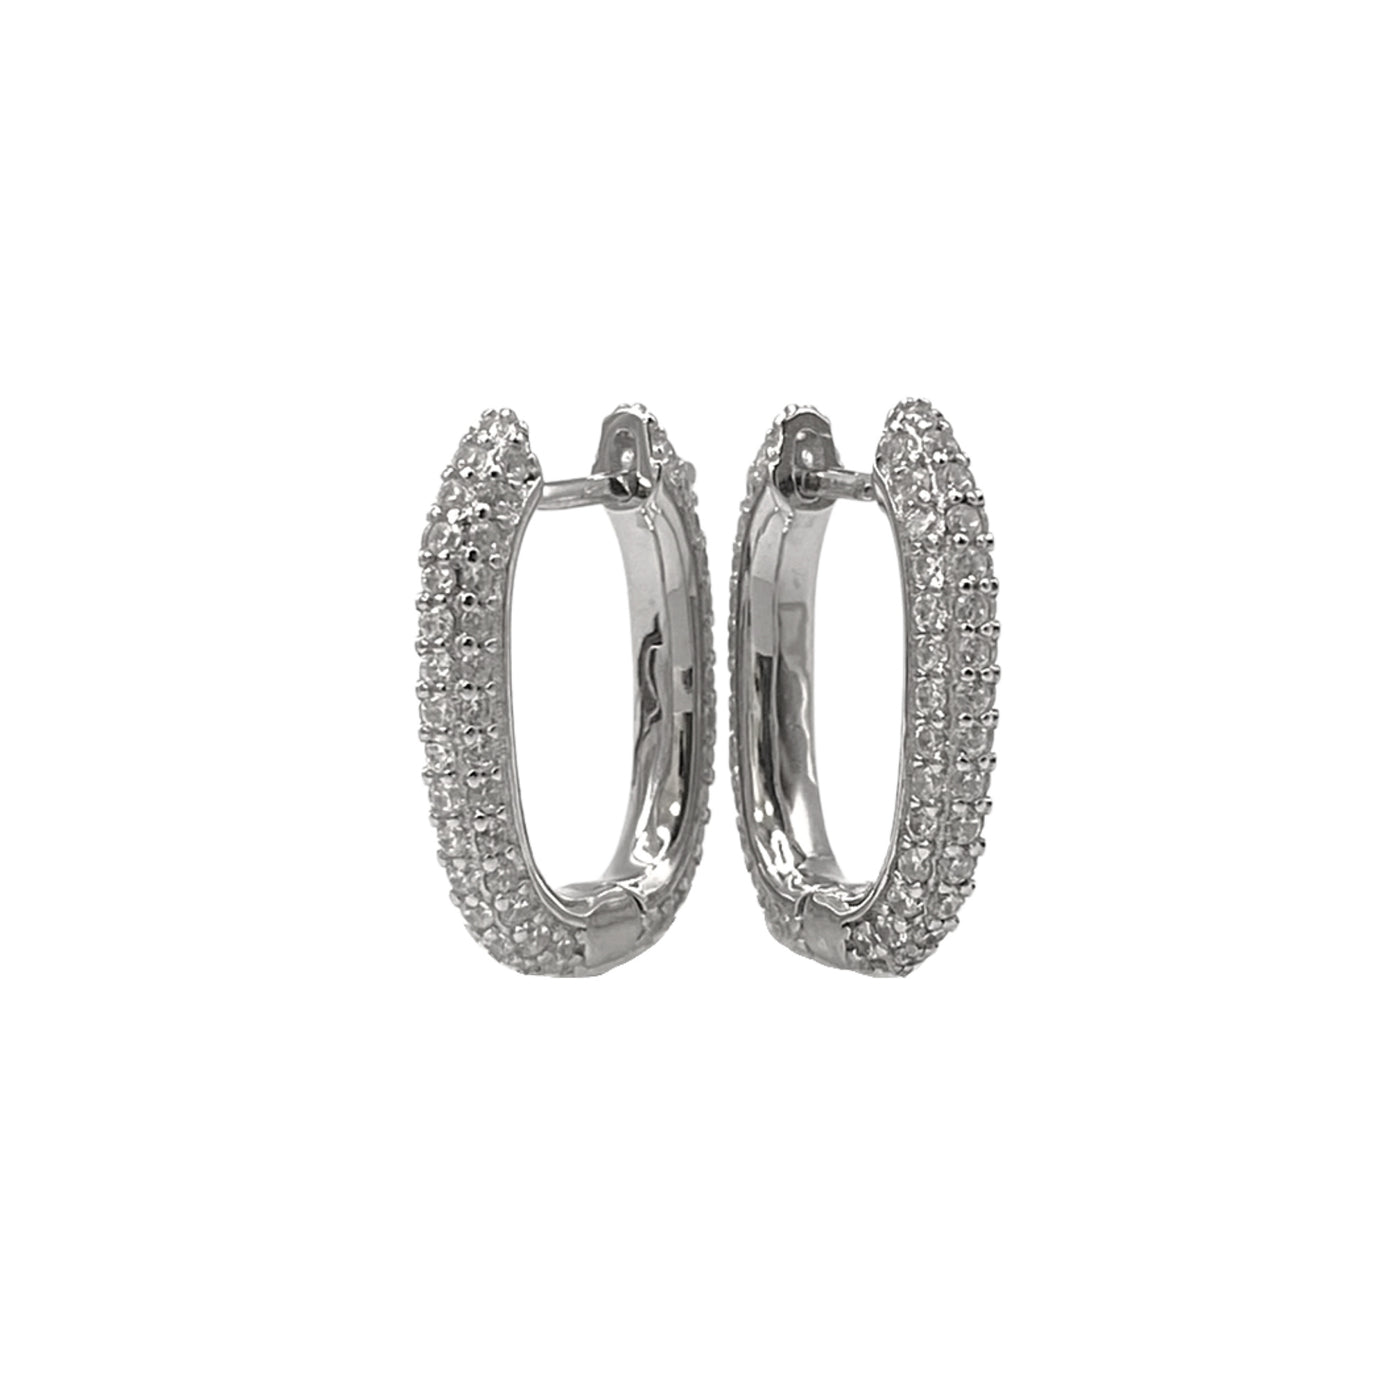 Silver earrings with cubic zirconia - 14.90 x 18.50 mm